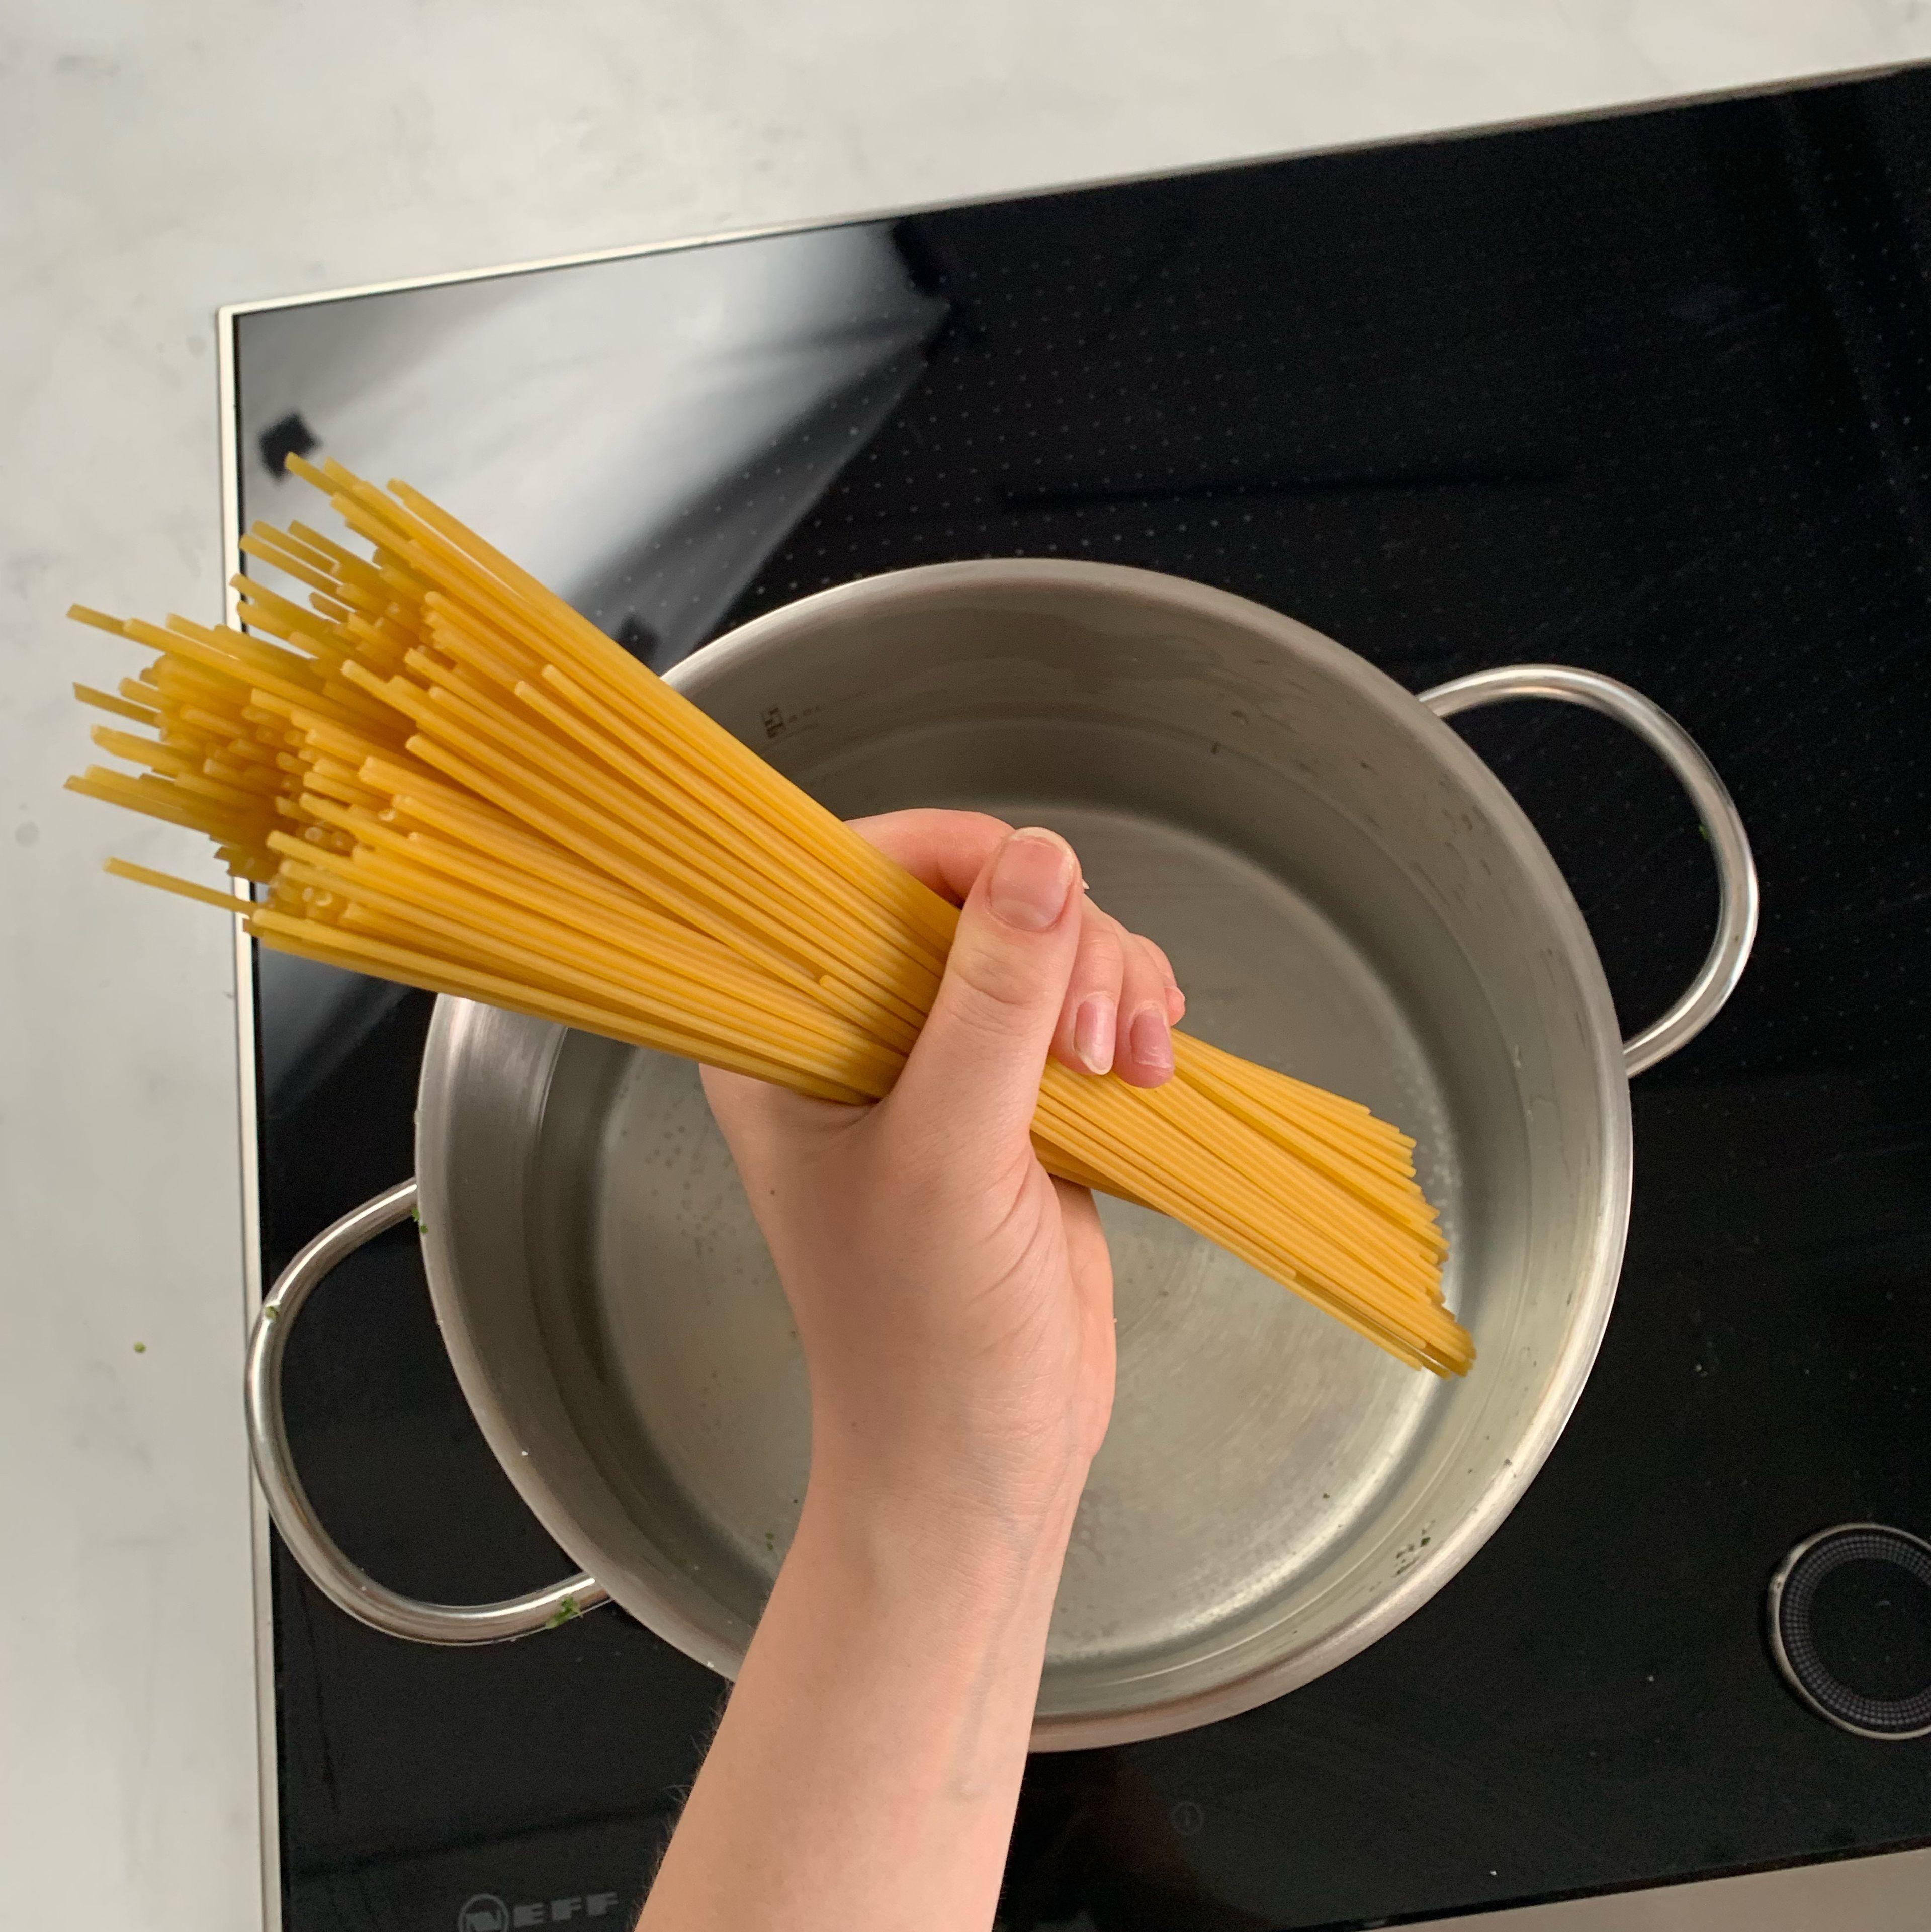 Cook pasta in plenty of salted water for approx. 12 min.